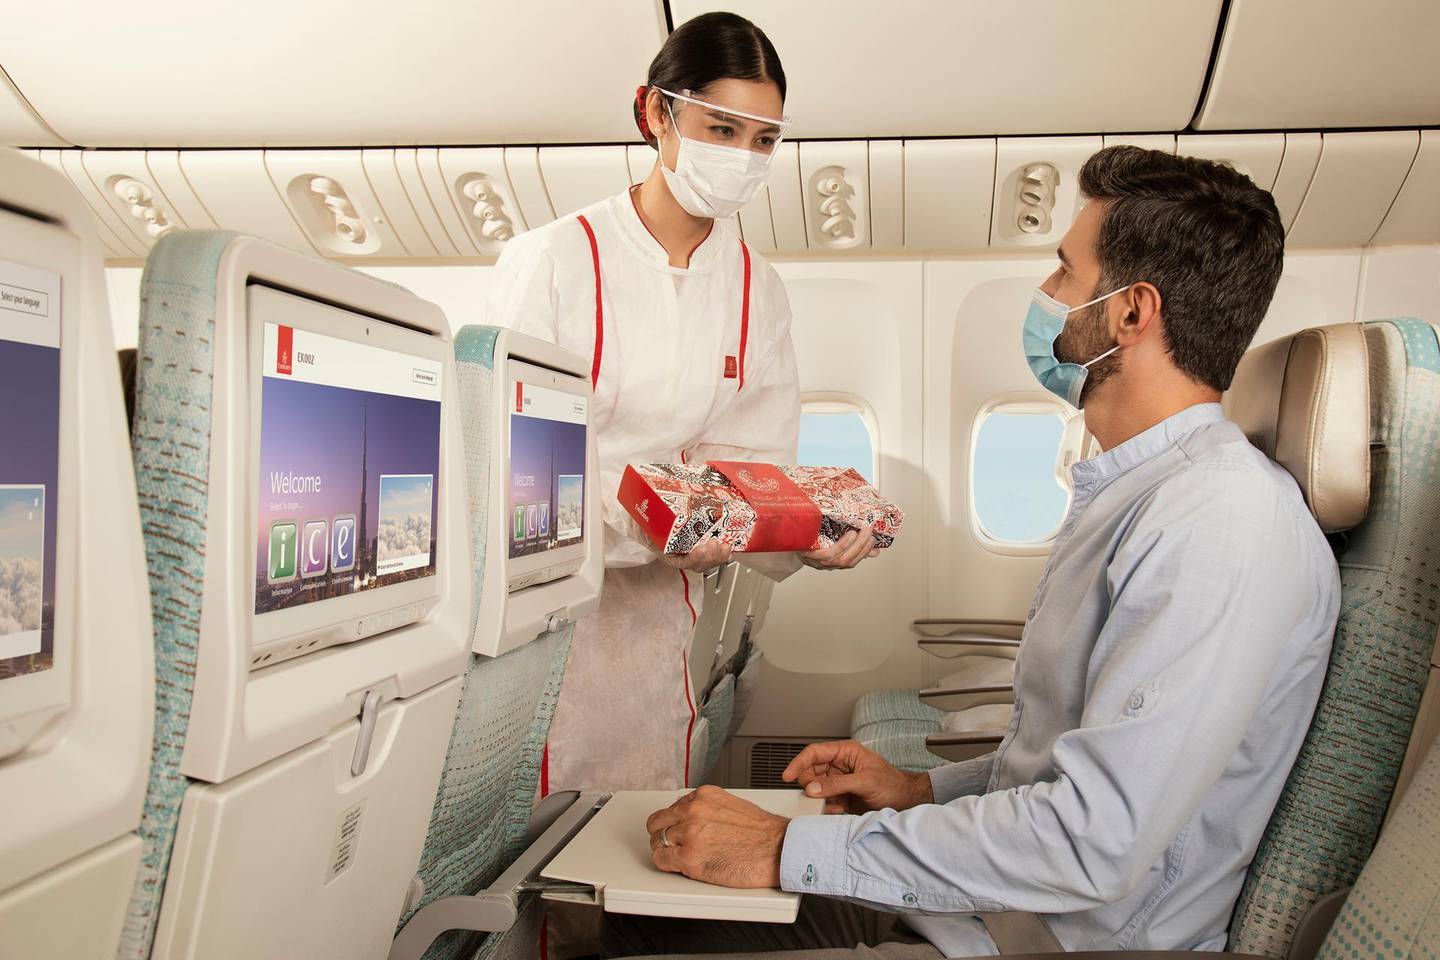 Emirates has been serving Ramadan meal boxes on flights for more than 20 years. Courtesy Emirates